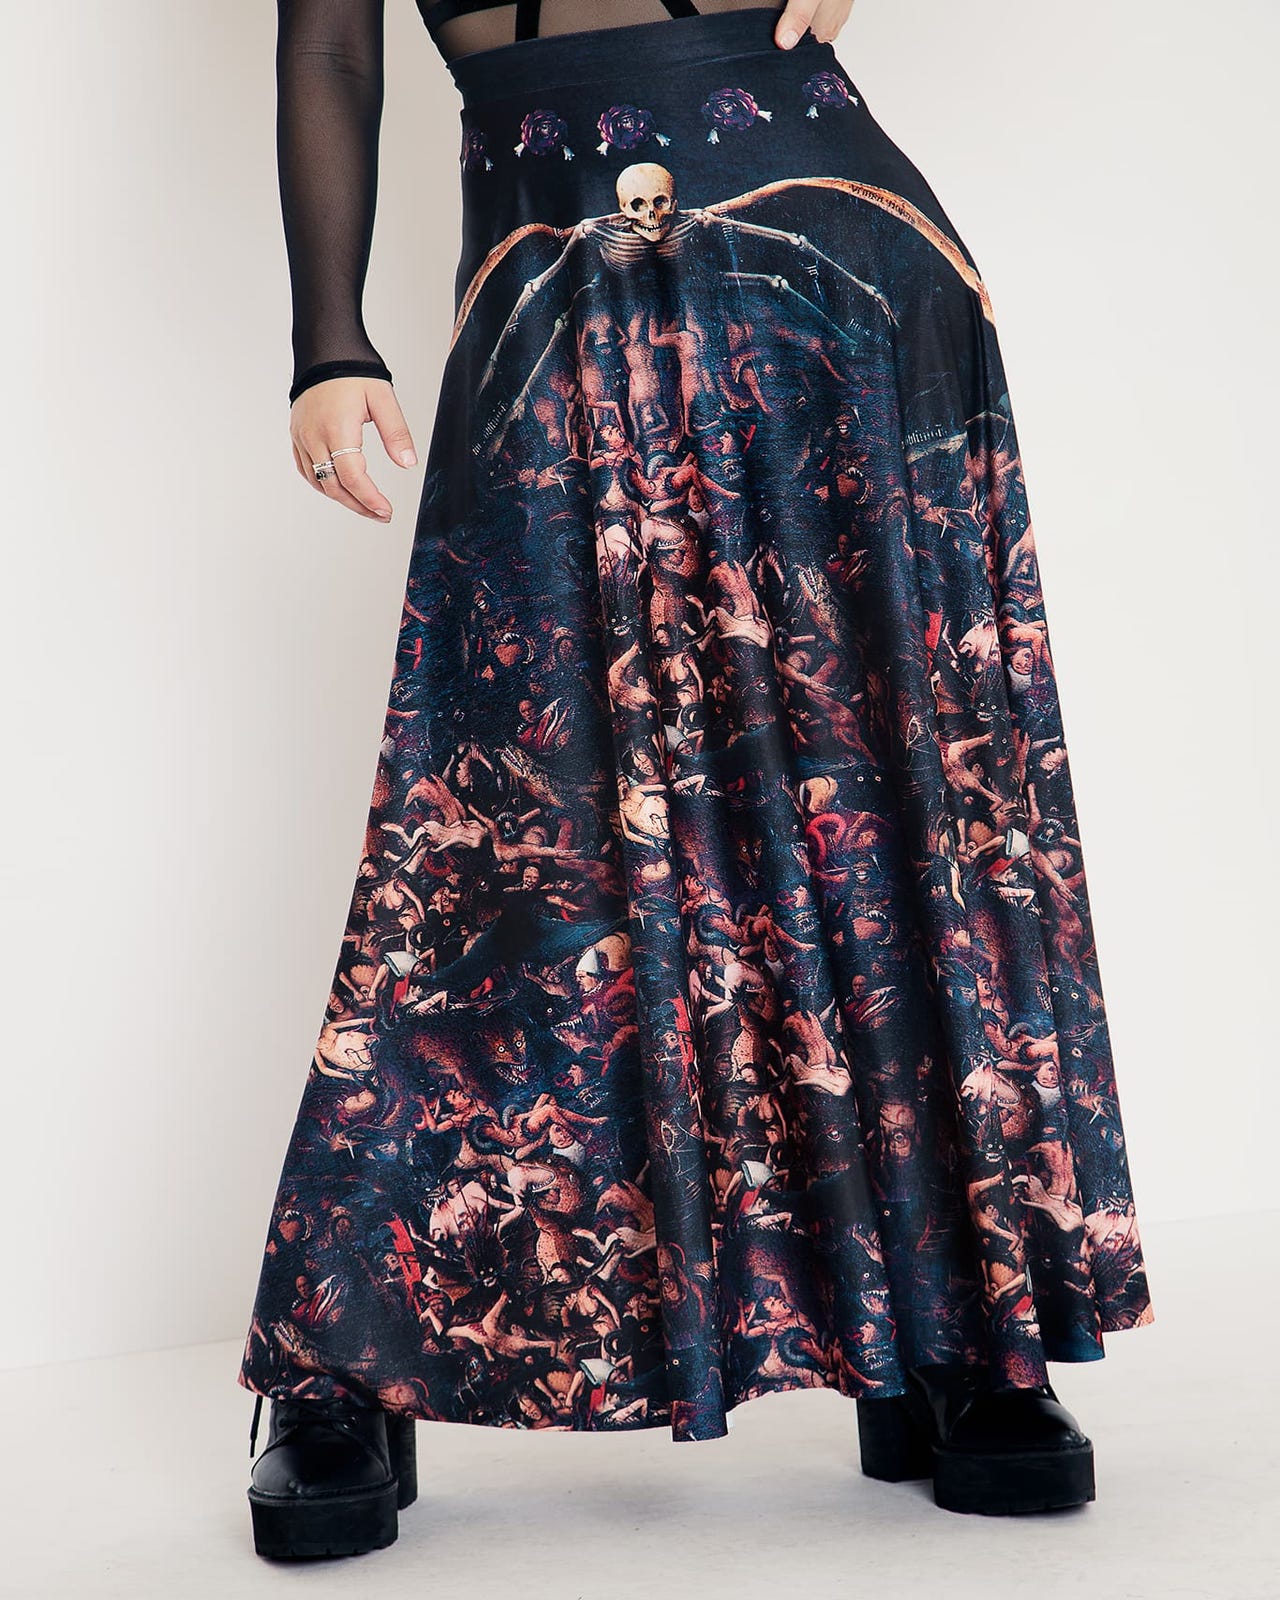 The Damned Maxi Skirt - Limited